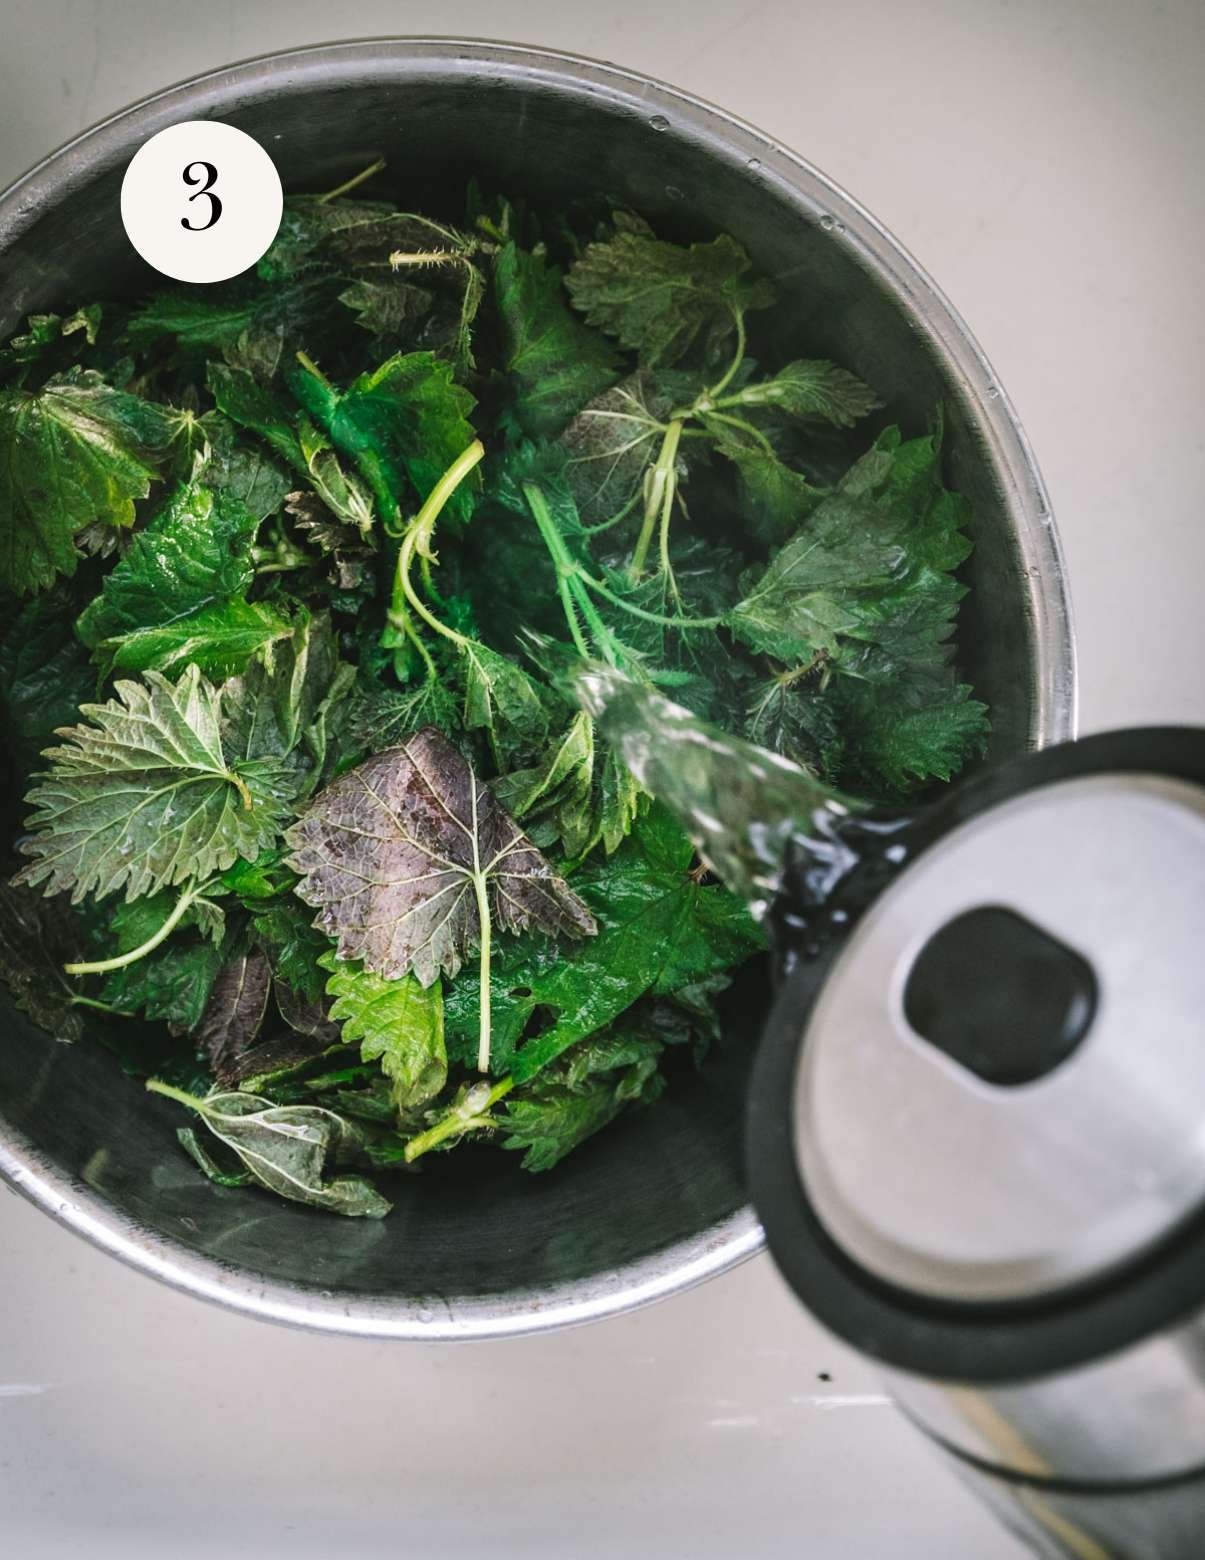 Boiling water poured over nettle leaves.